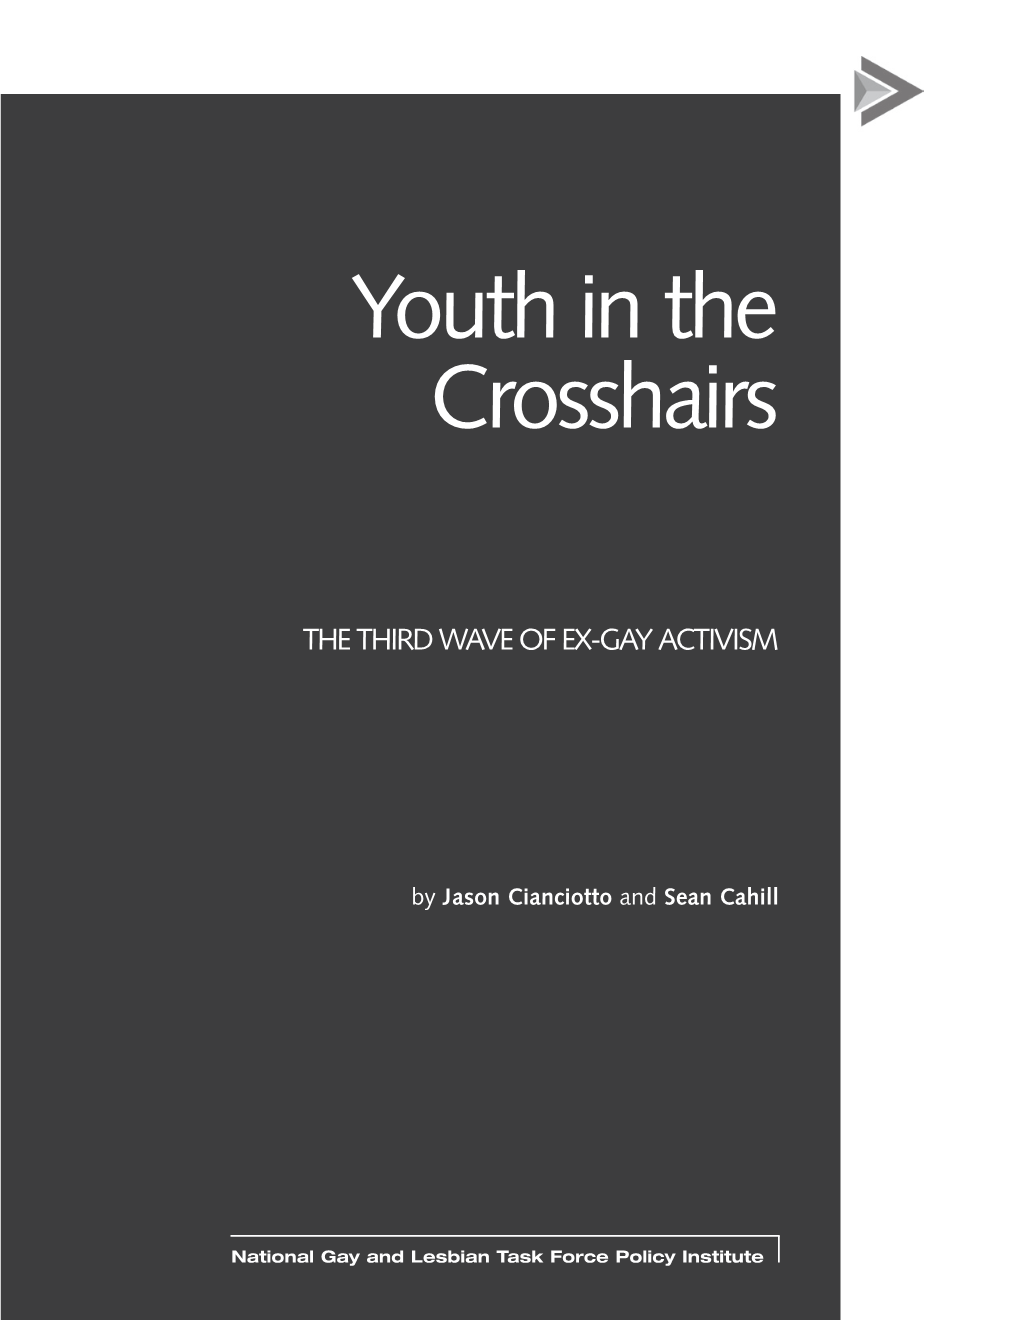 Youth in the Crosshairs